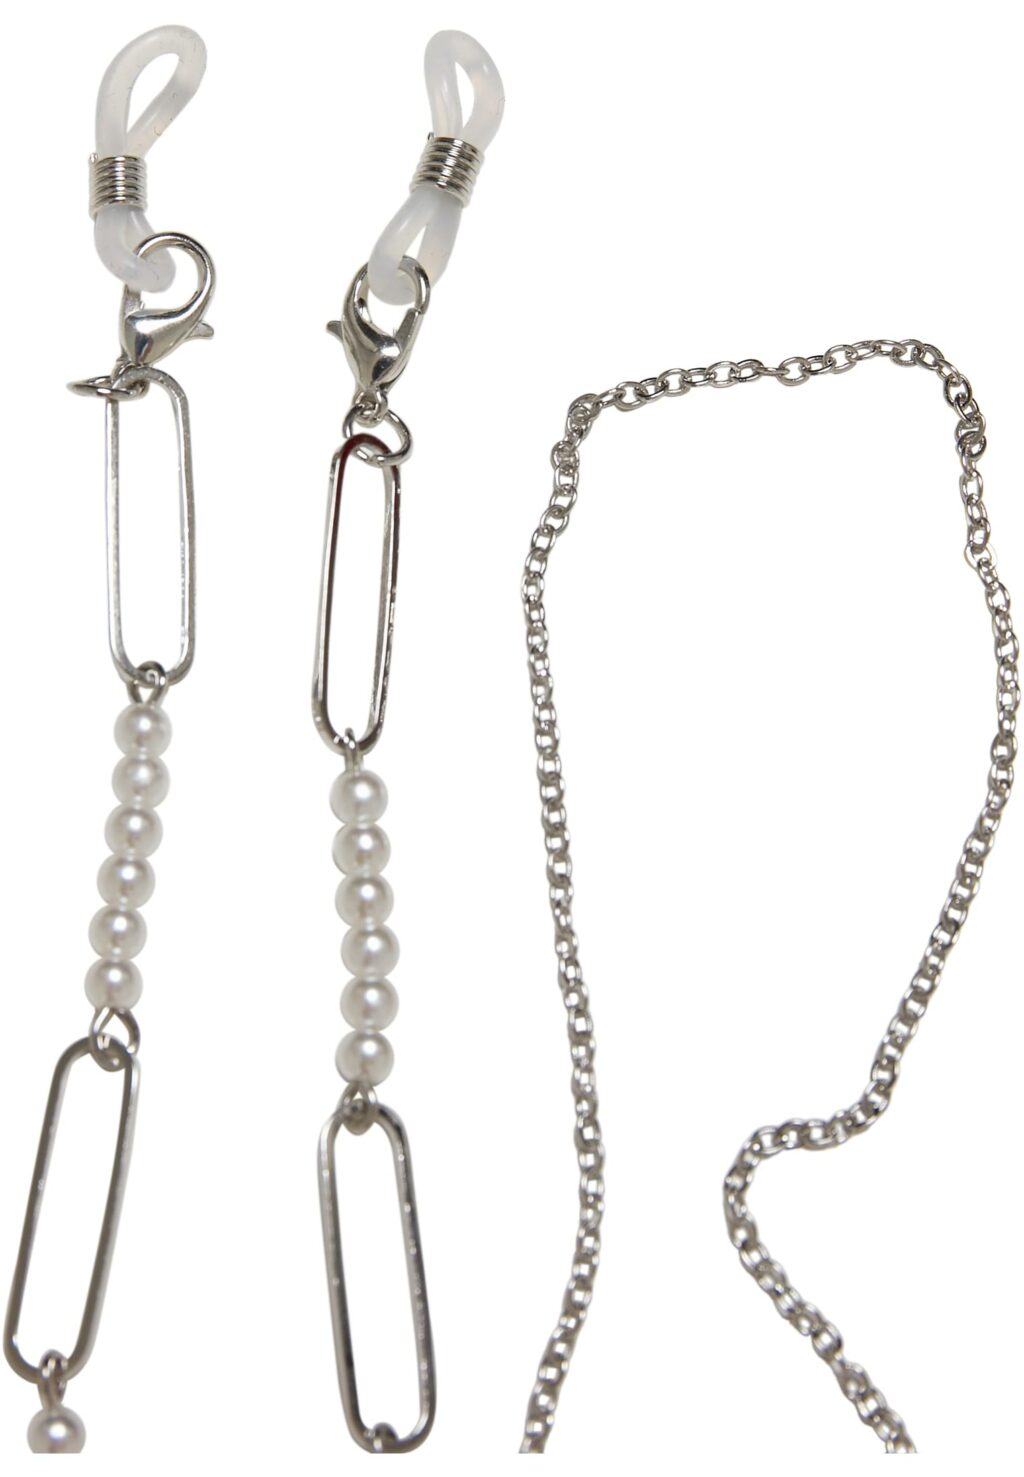 Multifunctional Chain With Pearls 2-Pack silver one TB5176